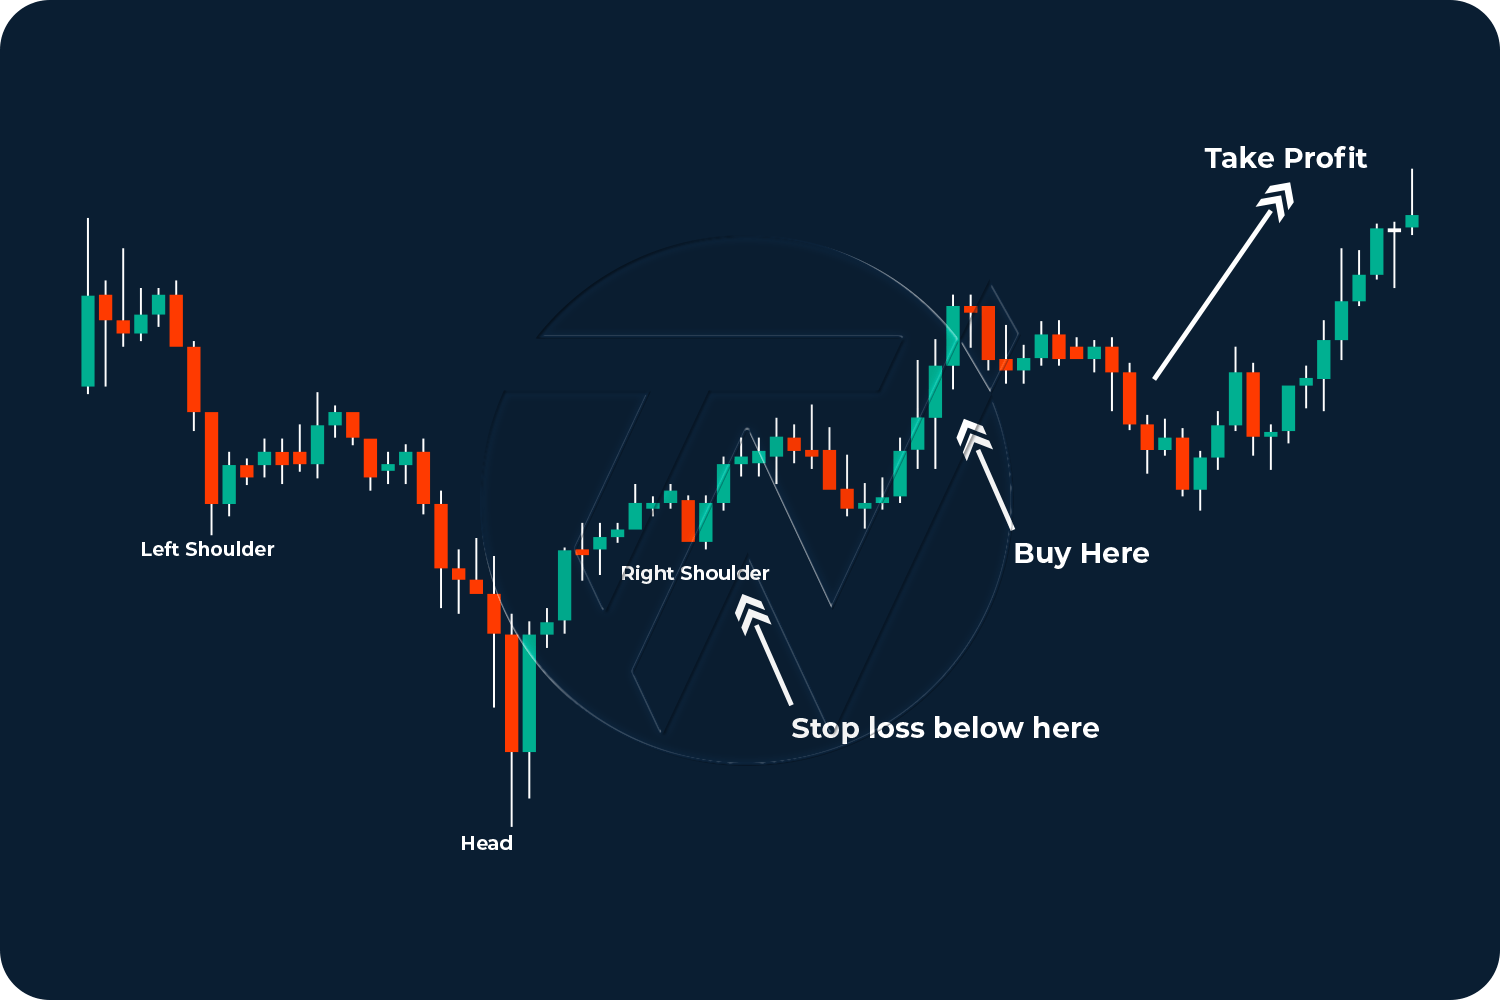 Head and Shoulders pattern trade example explained  illustration